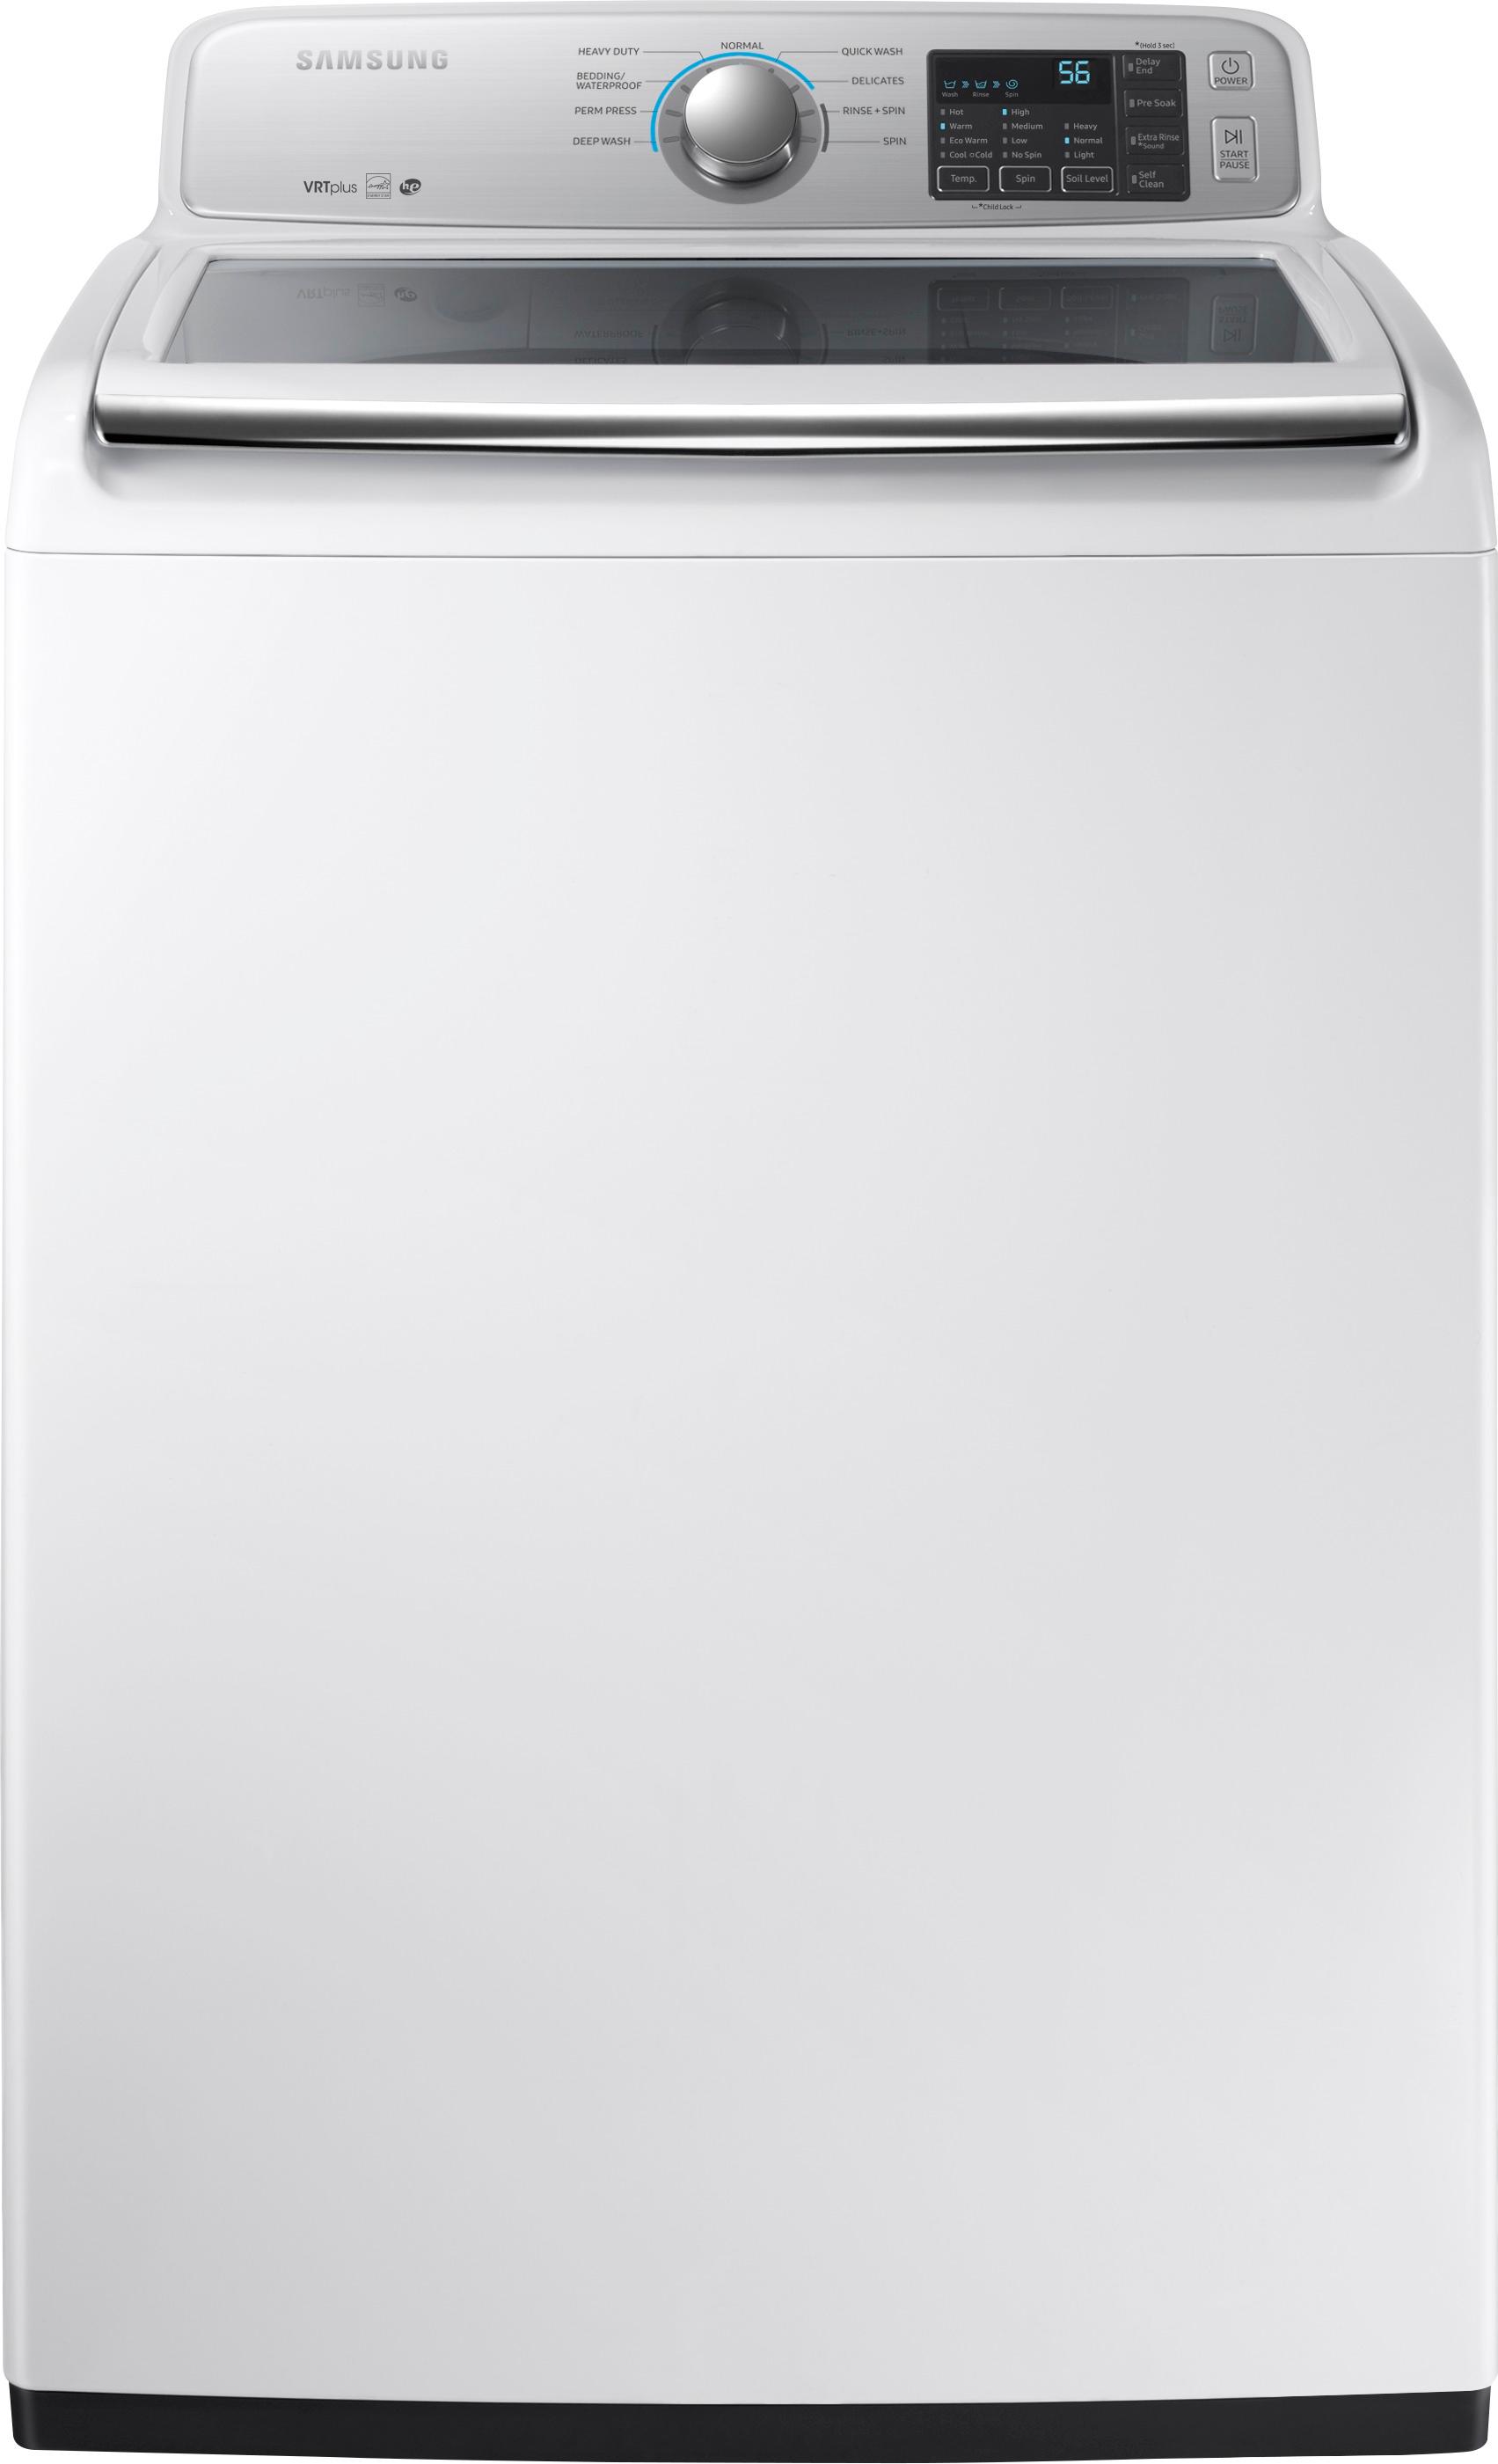 Best Buy Samsung 4 5 Cu Ft 9 Cycle Top Loading Washer White Wa45m7050aw